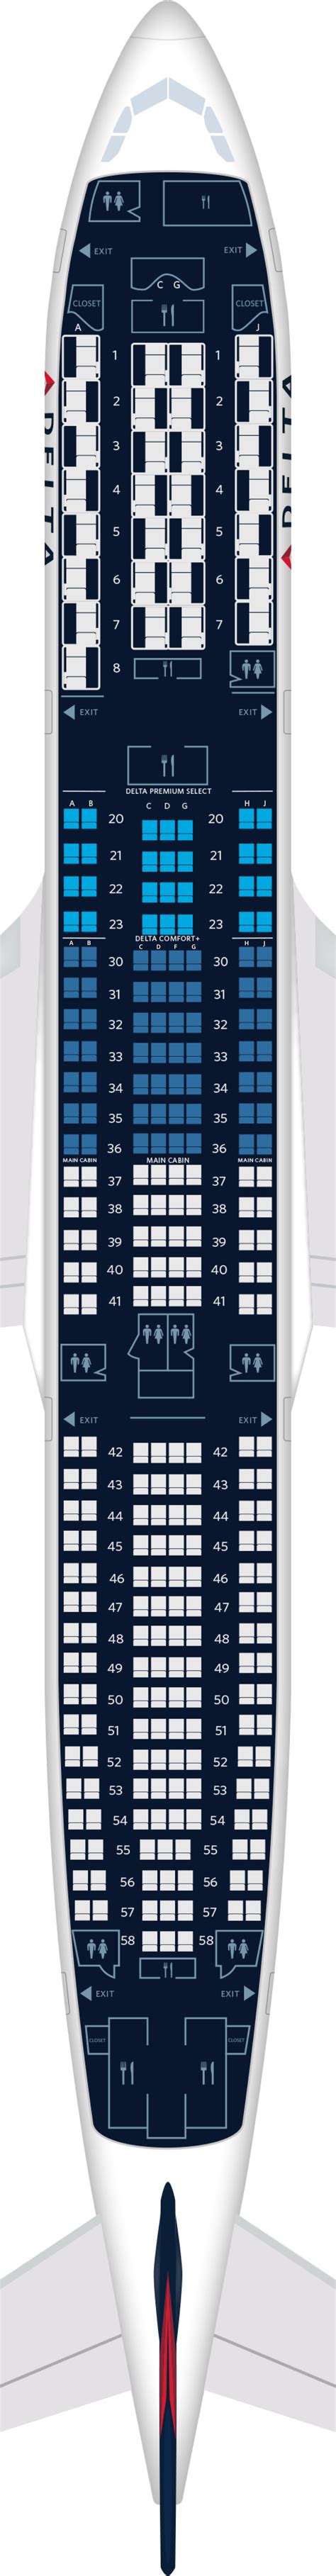 Airbus A Seat Map Delta Image To U